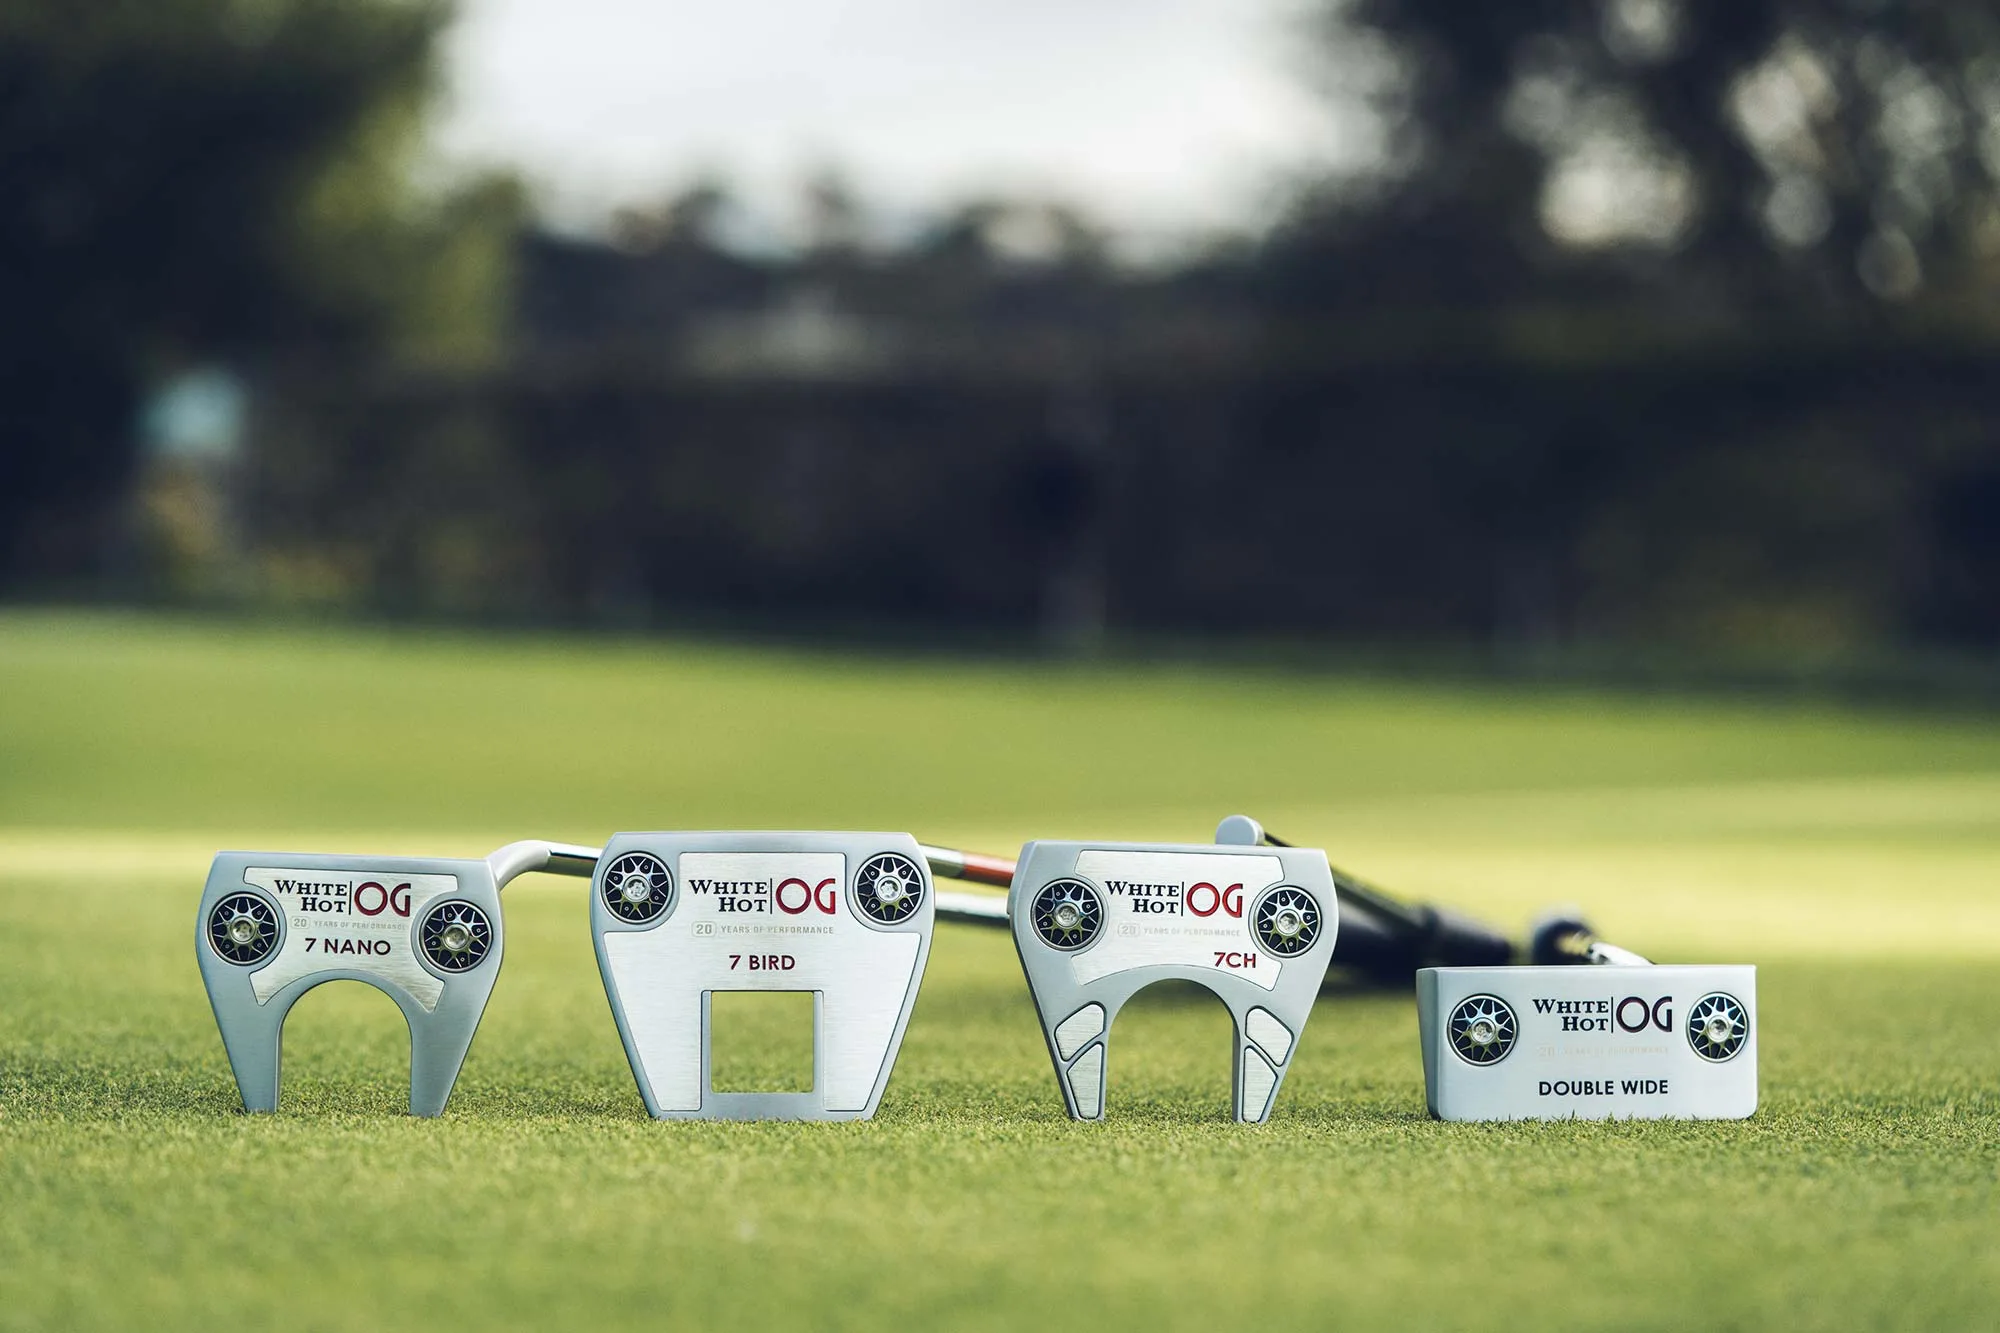 Odyssey White Hot putters